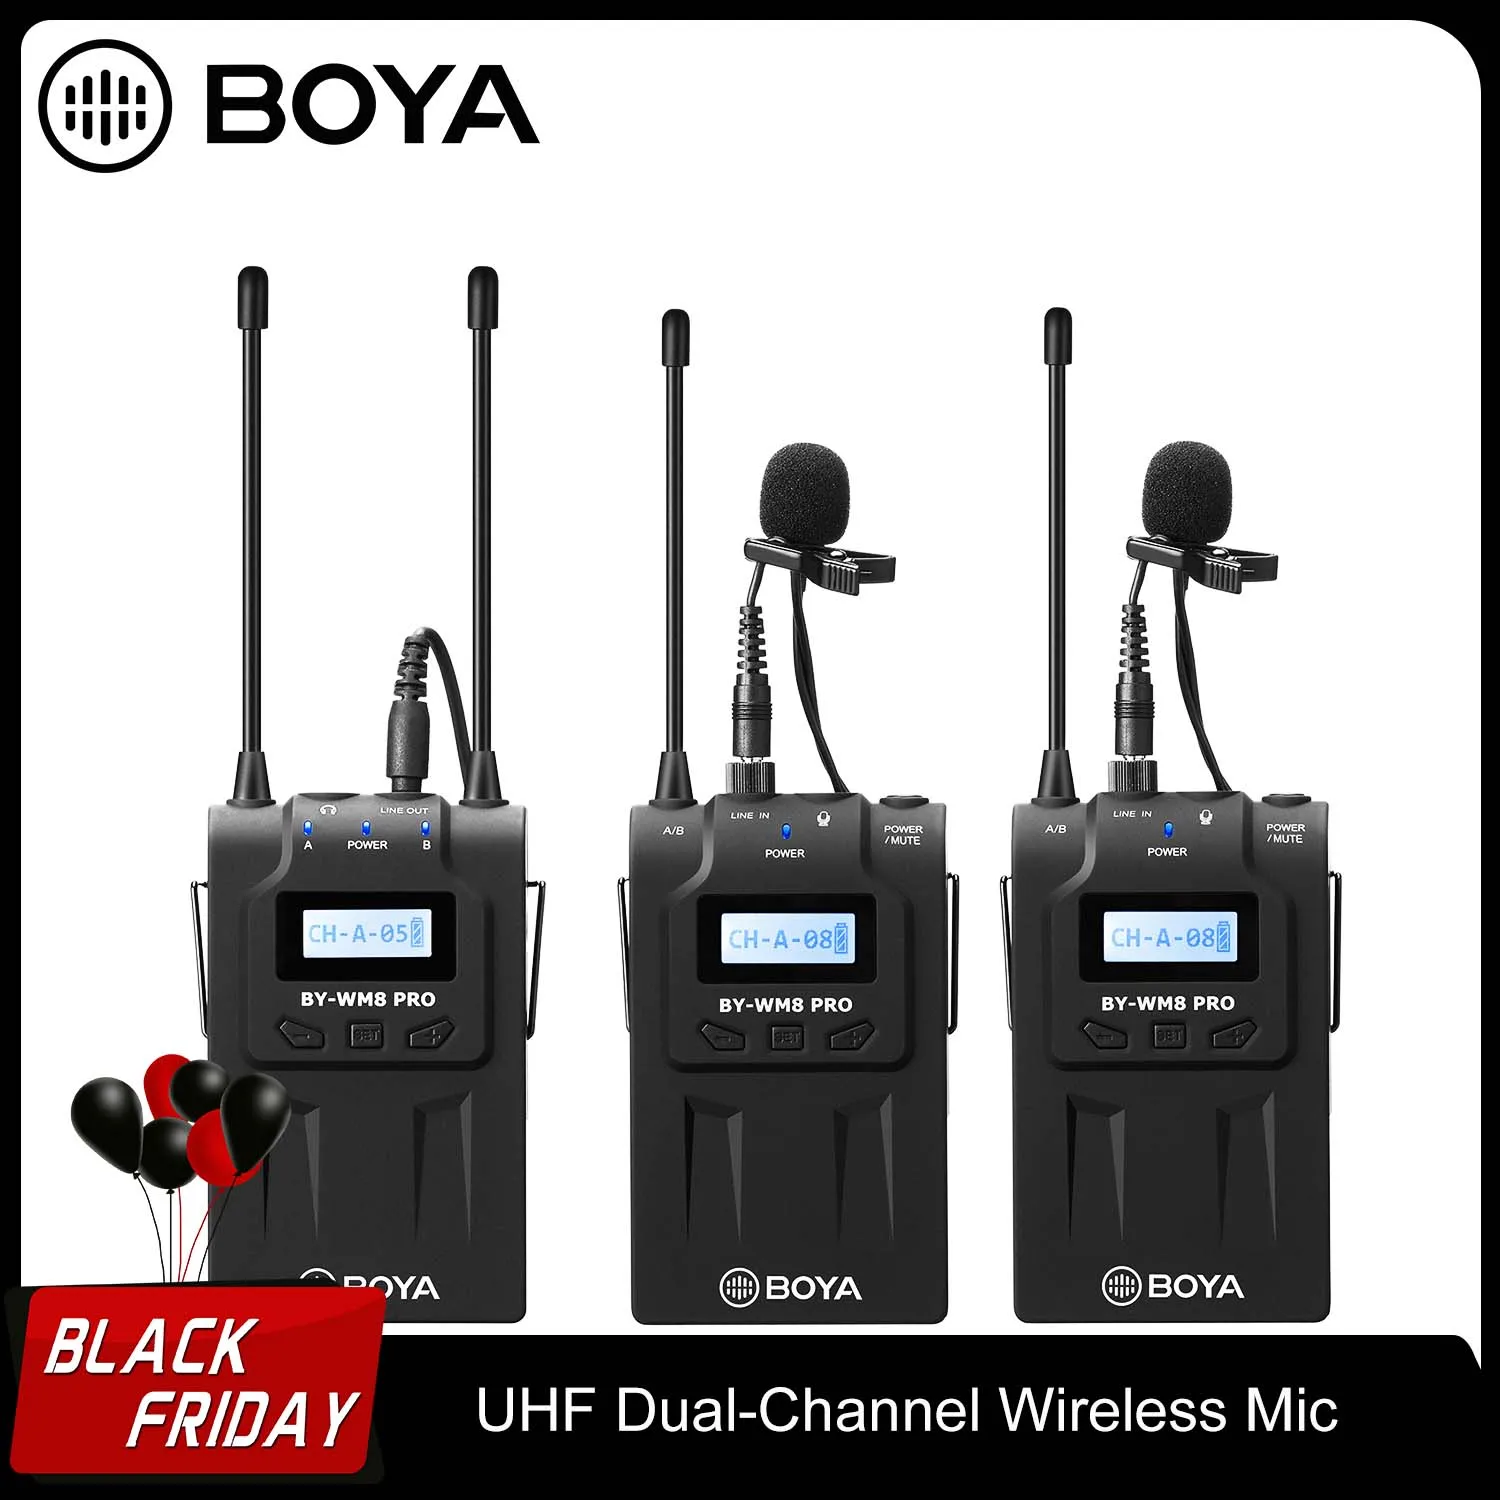 

BOYA BY-WM8 Pro K2 UHF Dual-Channel Wireless Microphone System for Cameras,Camcorders forfield recording,vlogging, YouTube video